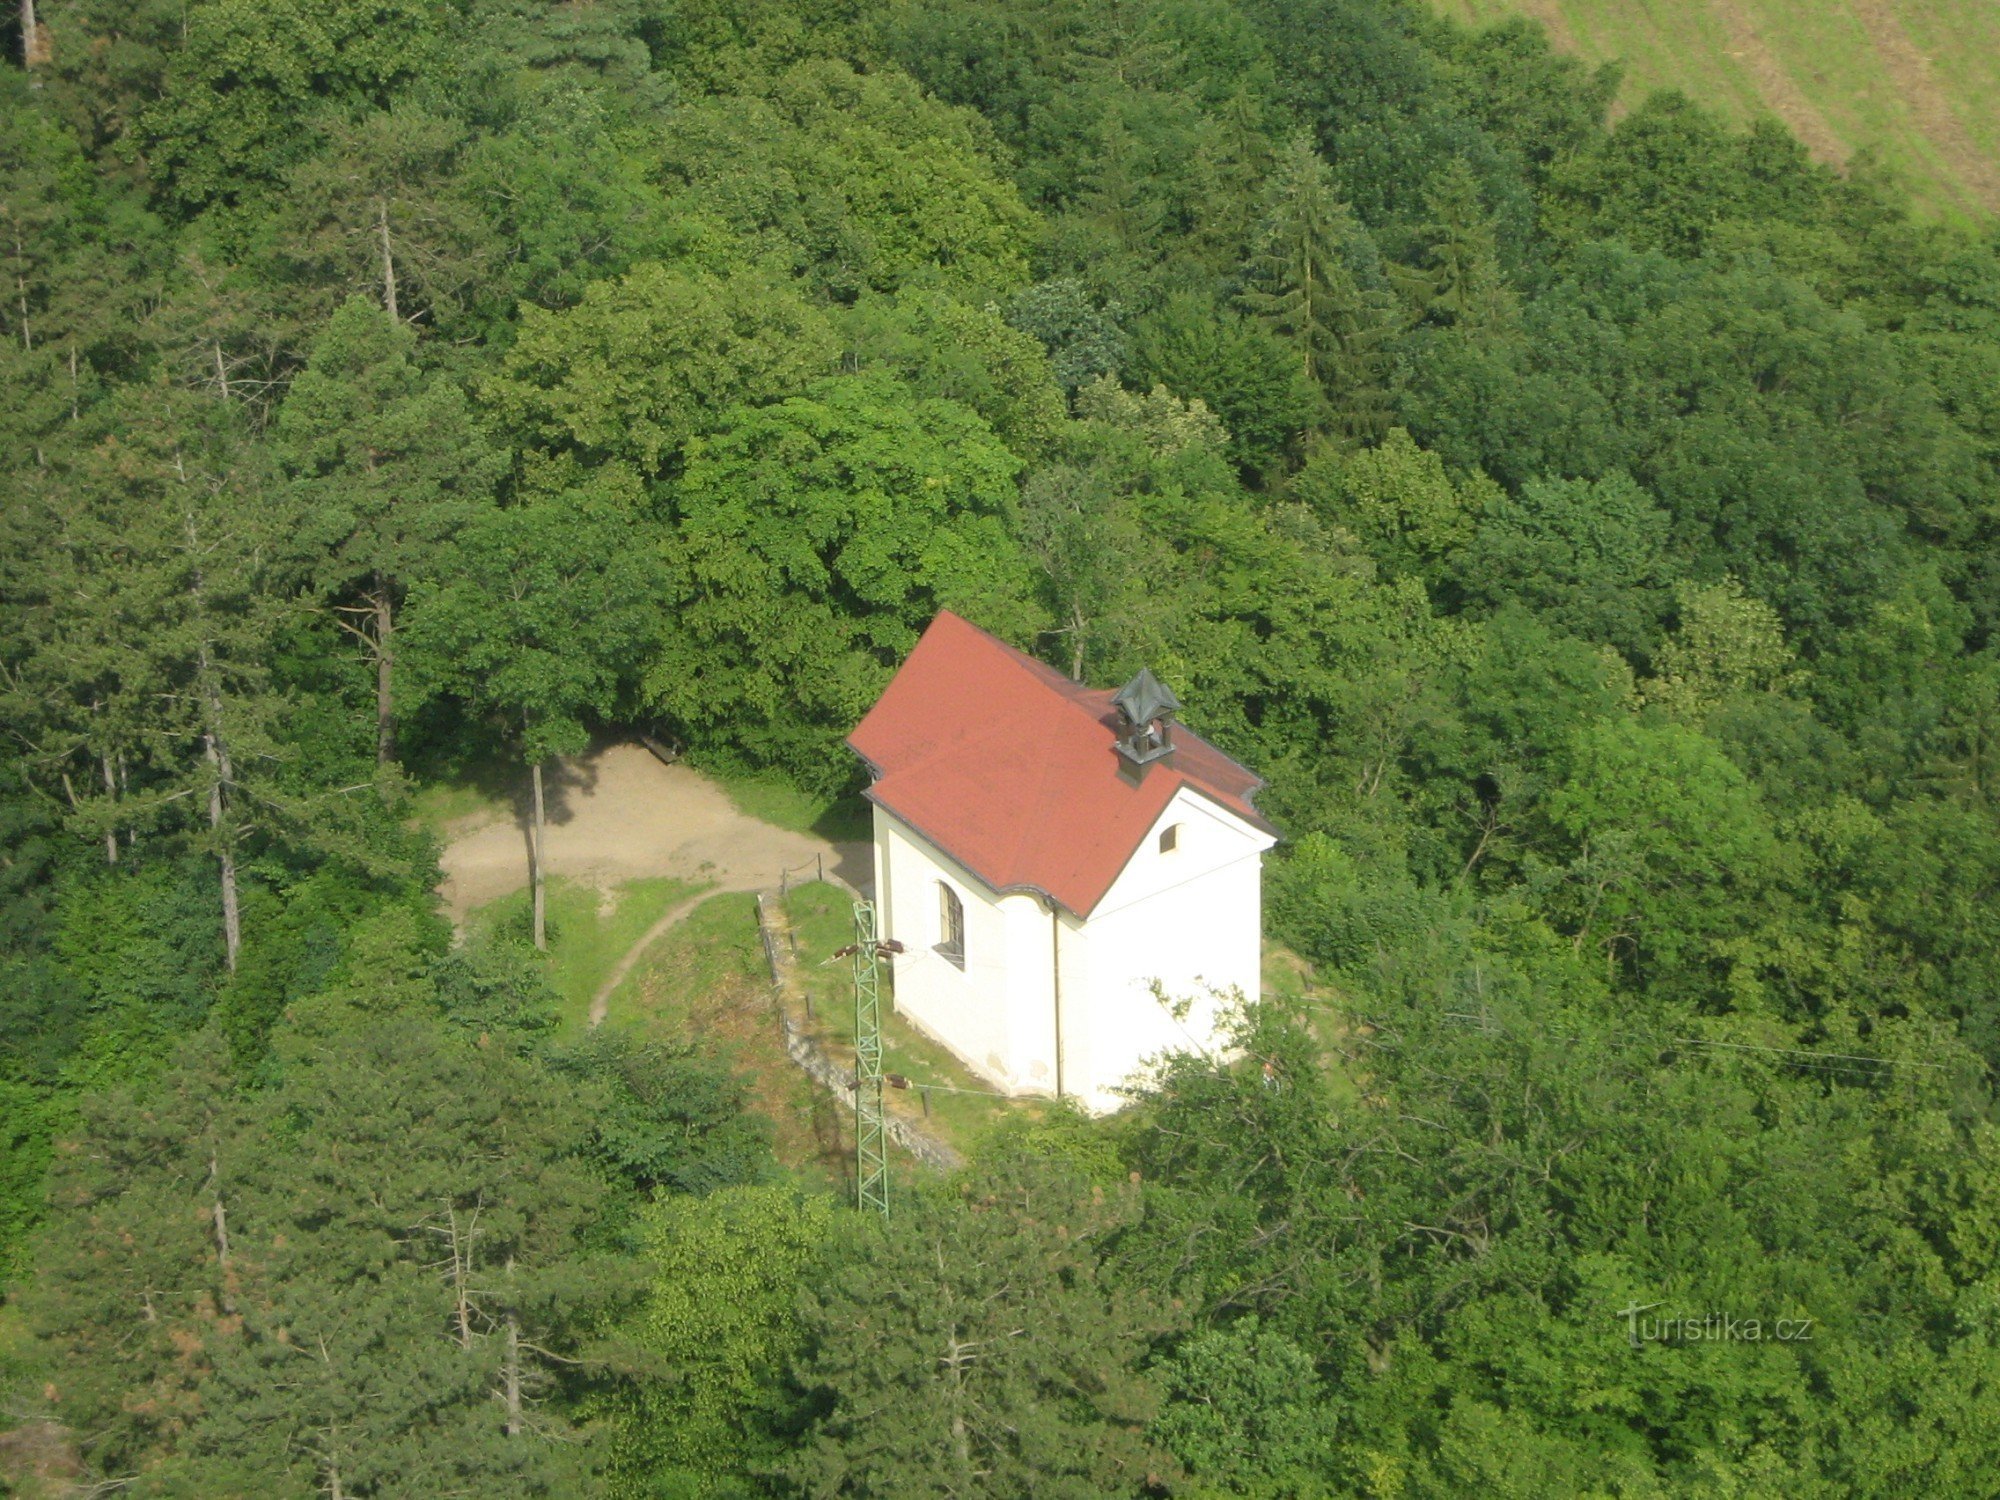 Chapel of the Holy Cross from above